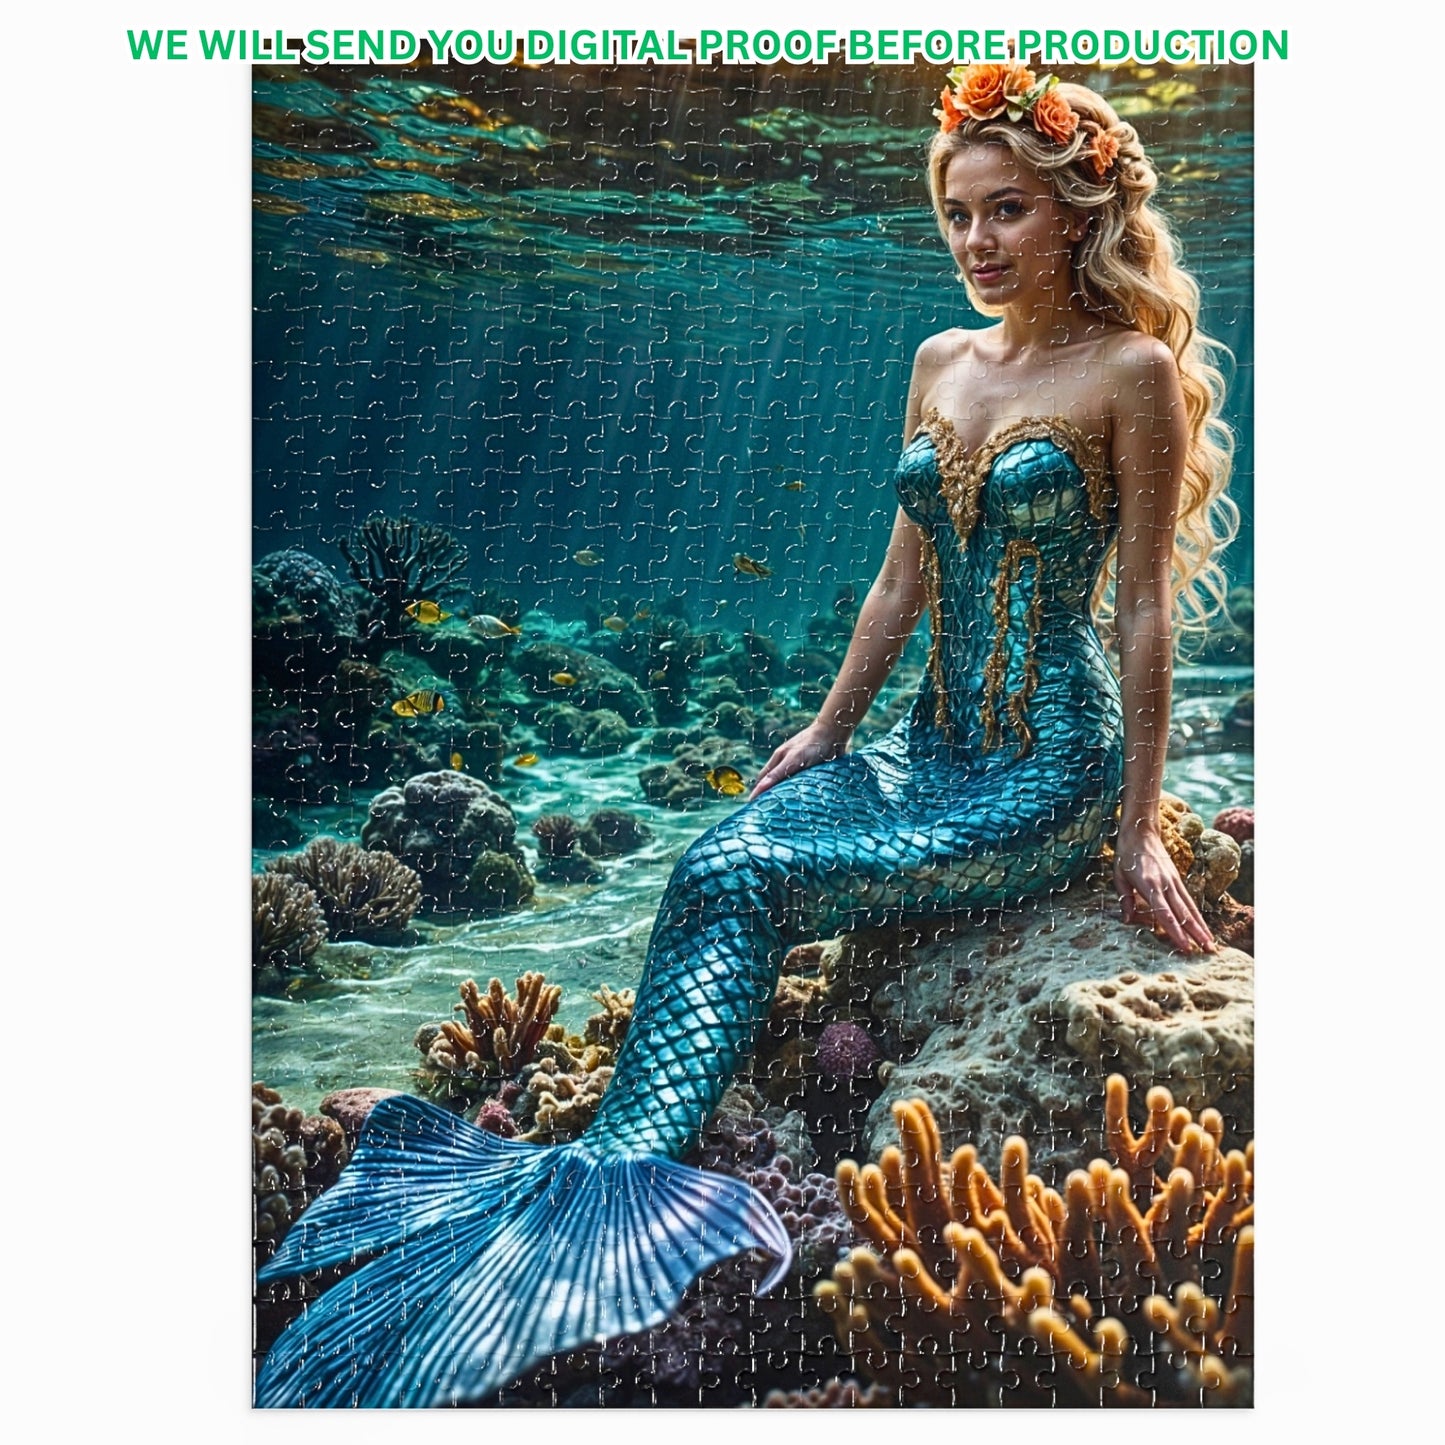 Turn your photo into a personalized mermaid puzzle! Customize a princess portrait for a special birthday surprise. Choose from 250 to 1000 pieces. Lady mermaid gifts, princess gifts, and mermaid photo gifts are available. Transform any image into a unique mermaid art puzzle. Perfect for mermaid and princess lovers. Order your custom puzzle today!